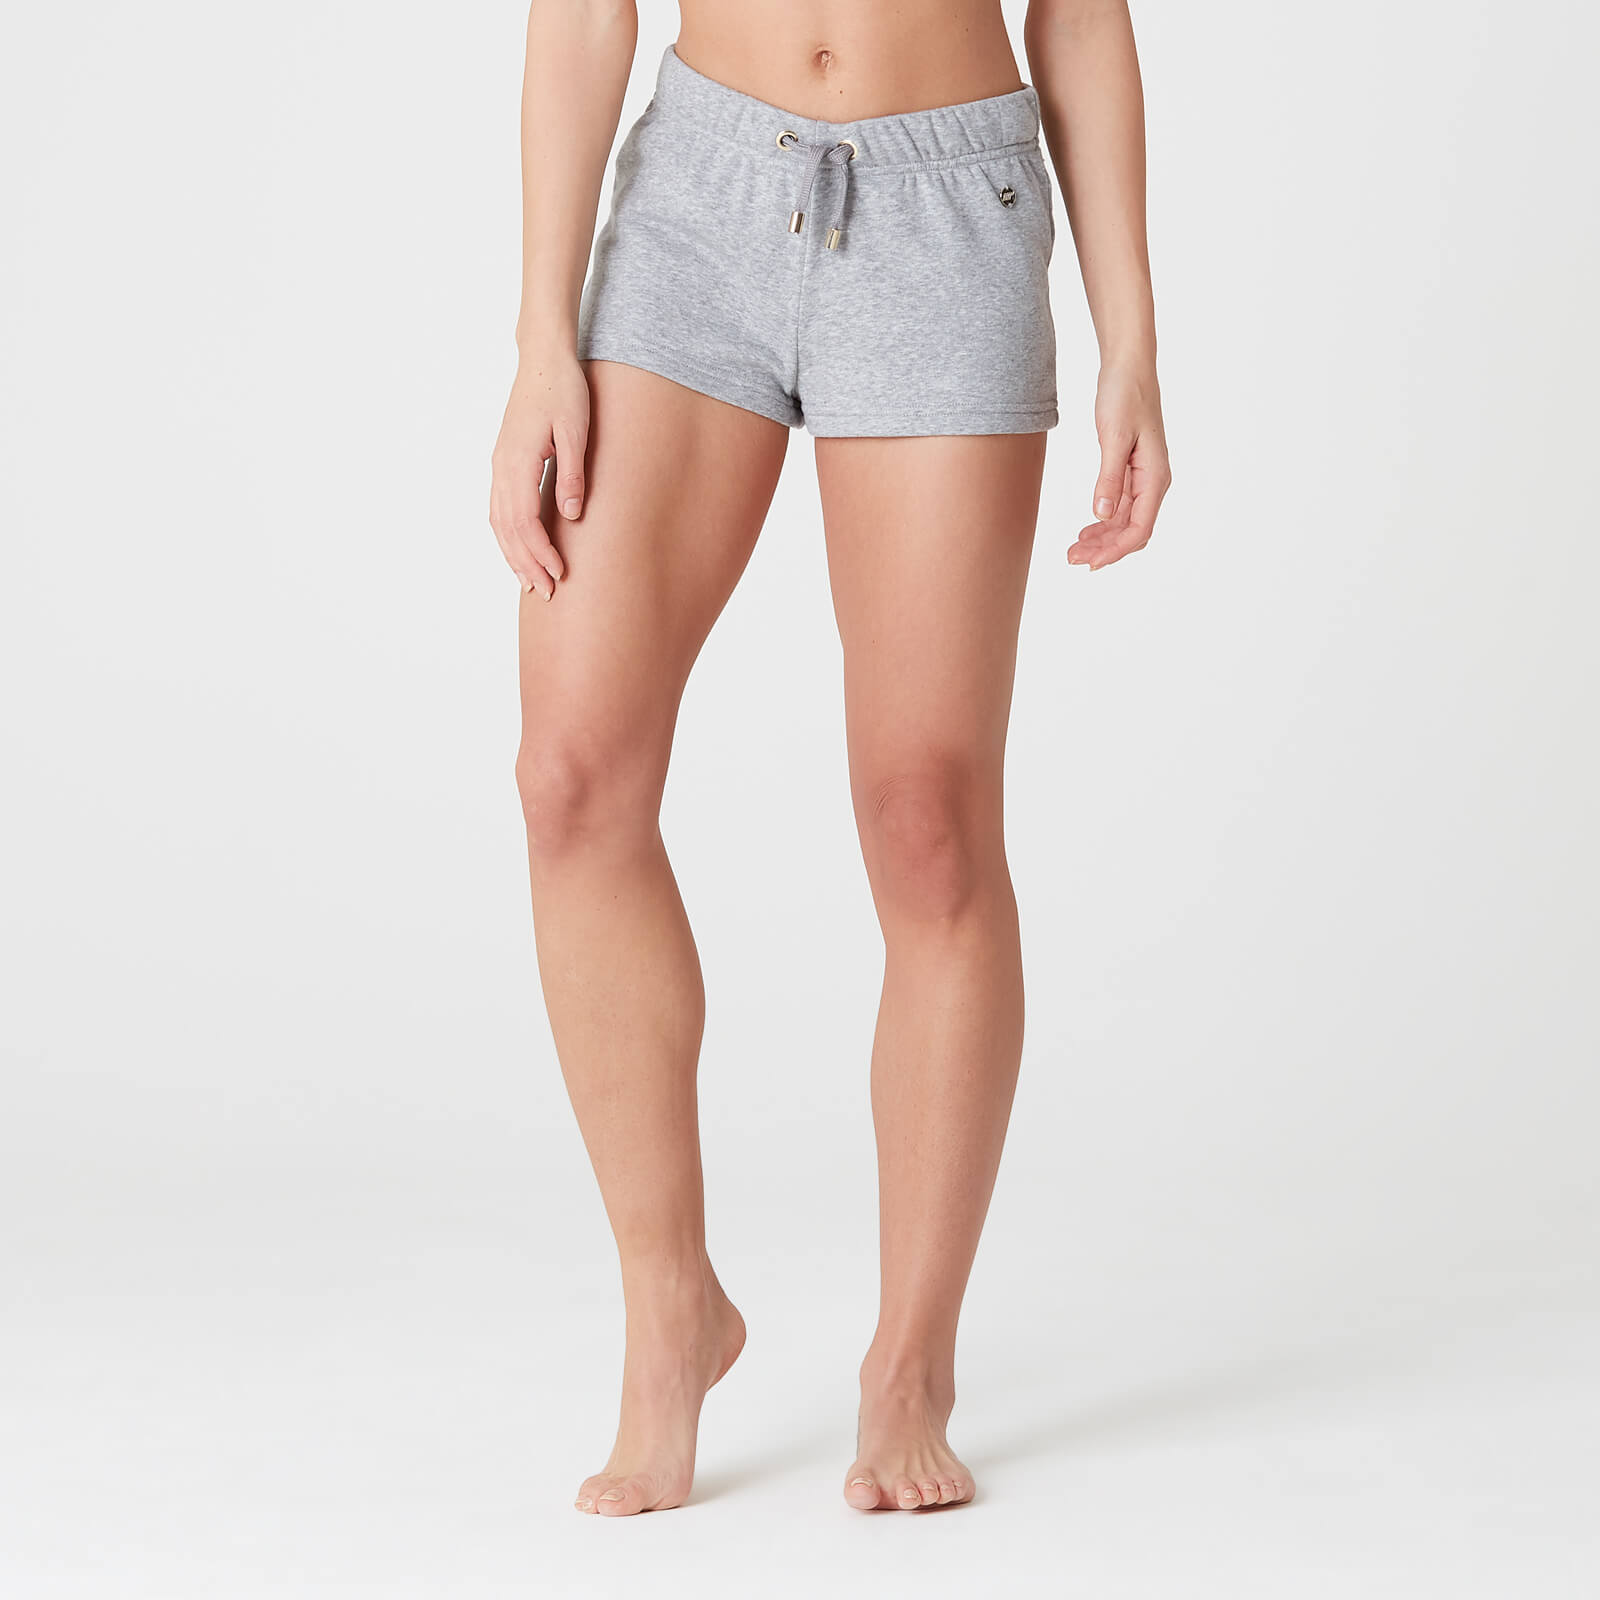 Luxe Lounge Shorts - Grey Marl - S